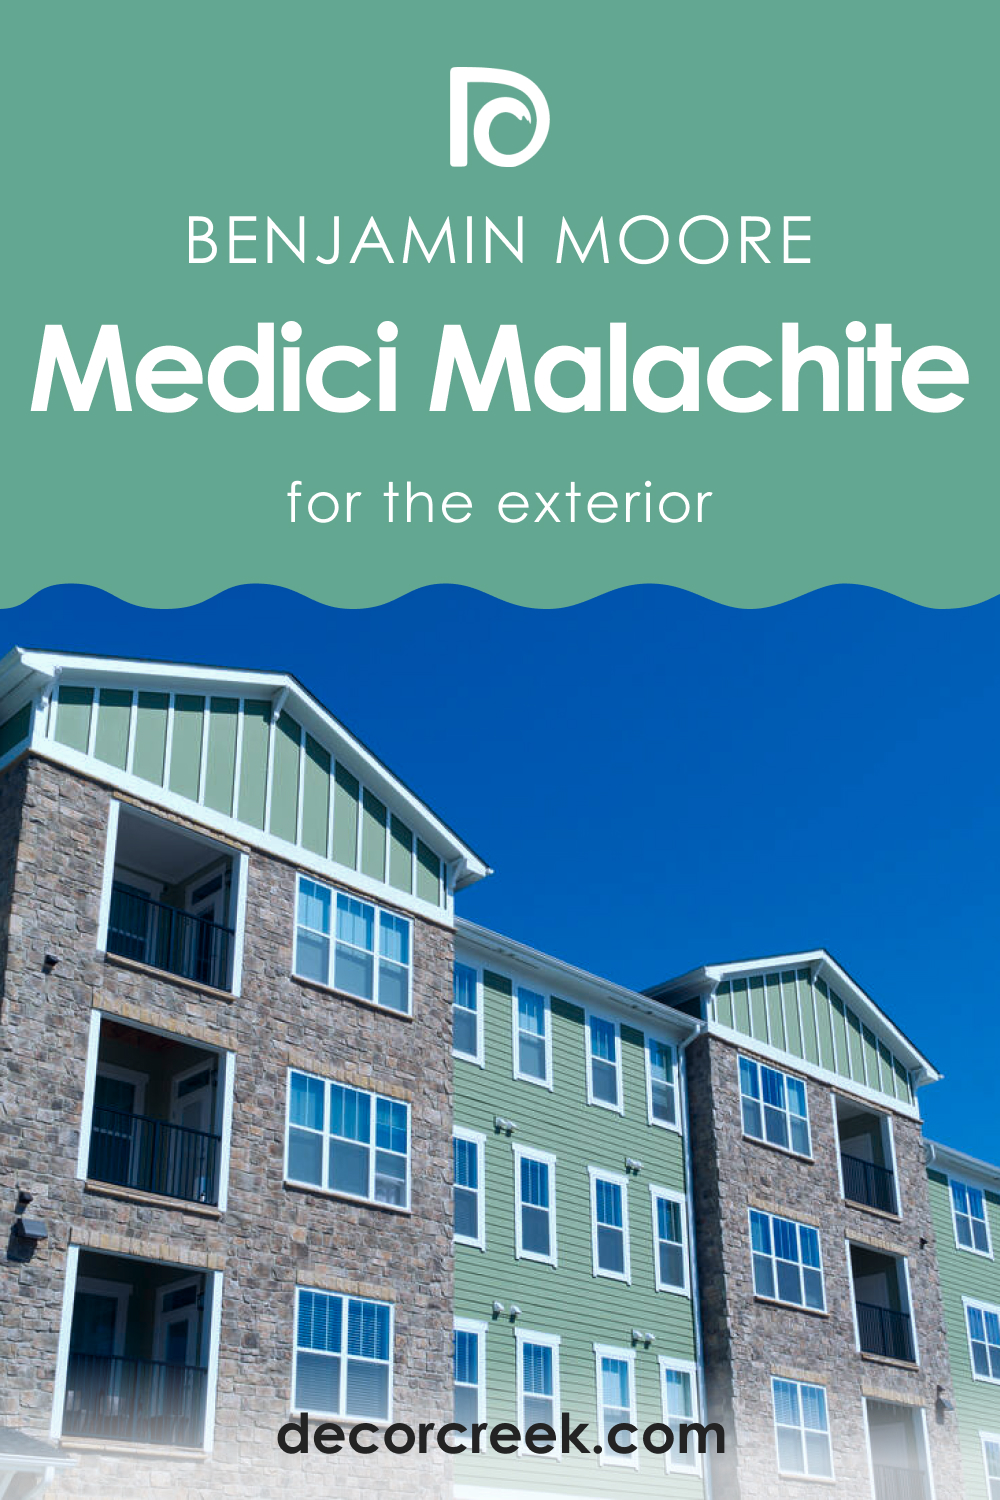 How to Use Medici Malachite 600 for an Exterior?